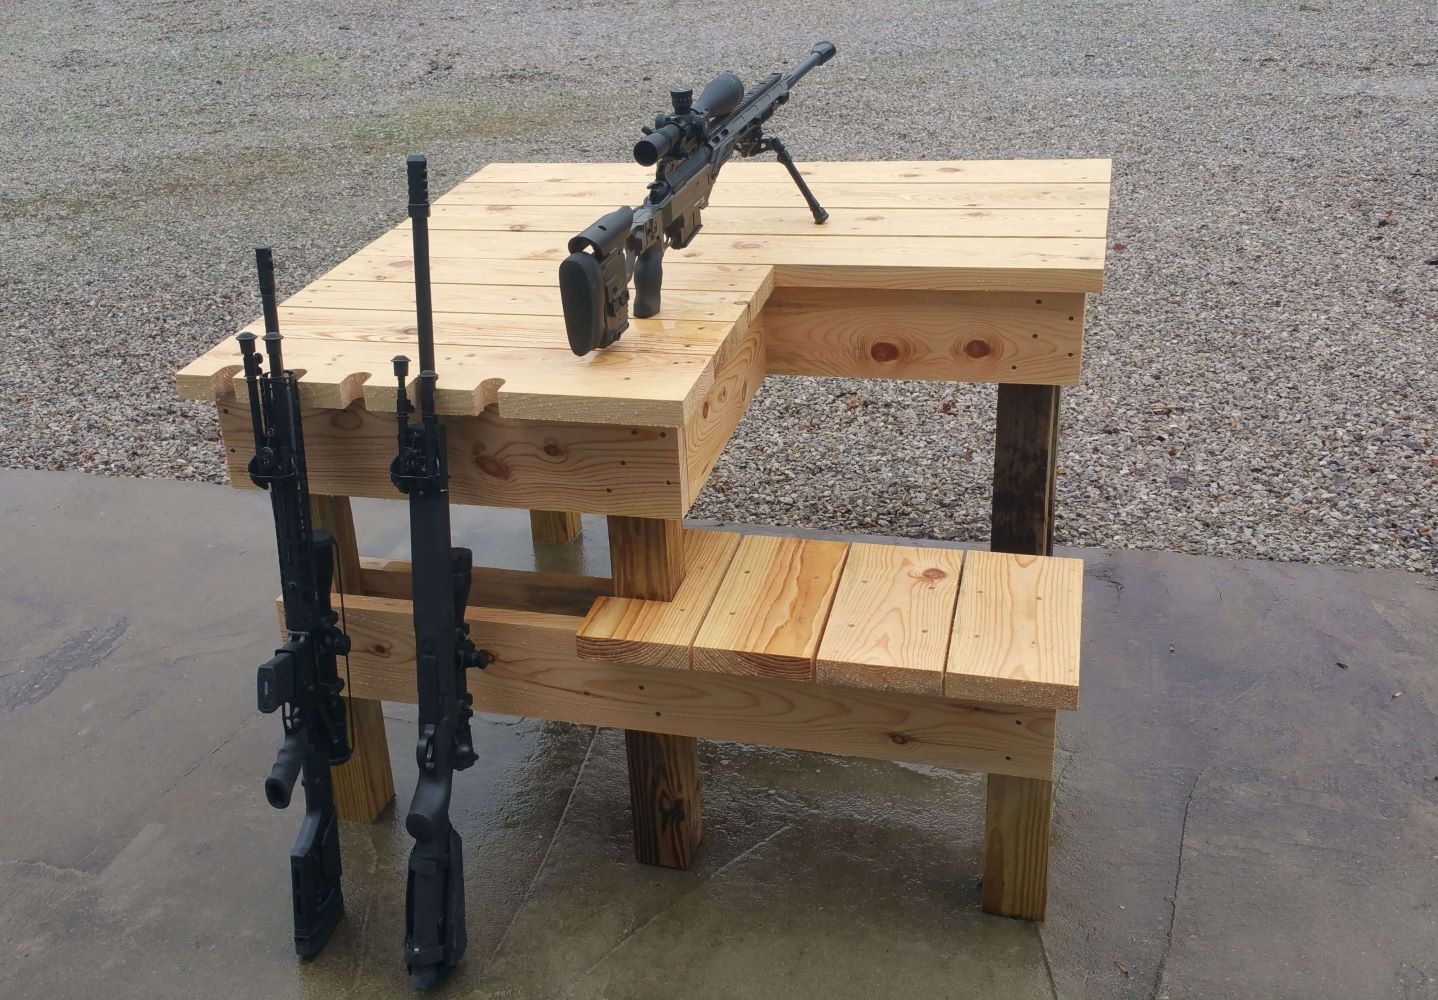 DIY Shooting Bench Plans: Build Your Own Customized Shooting Bench